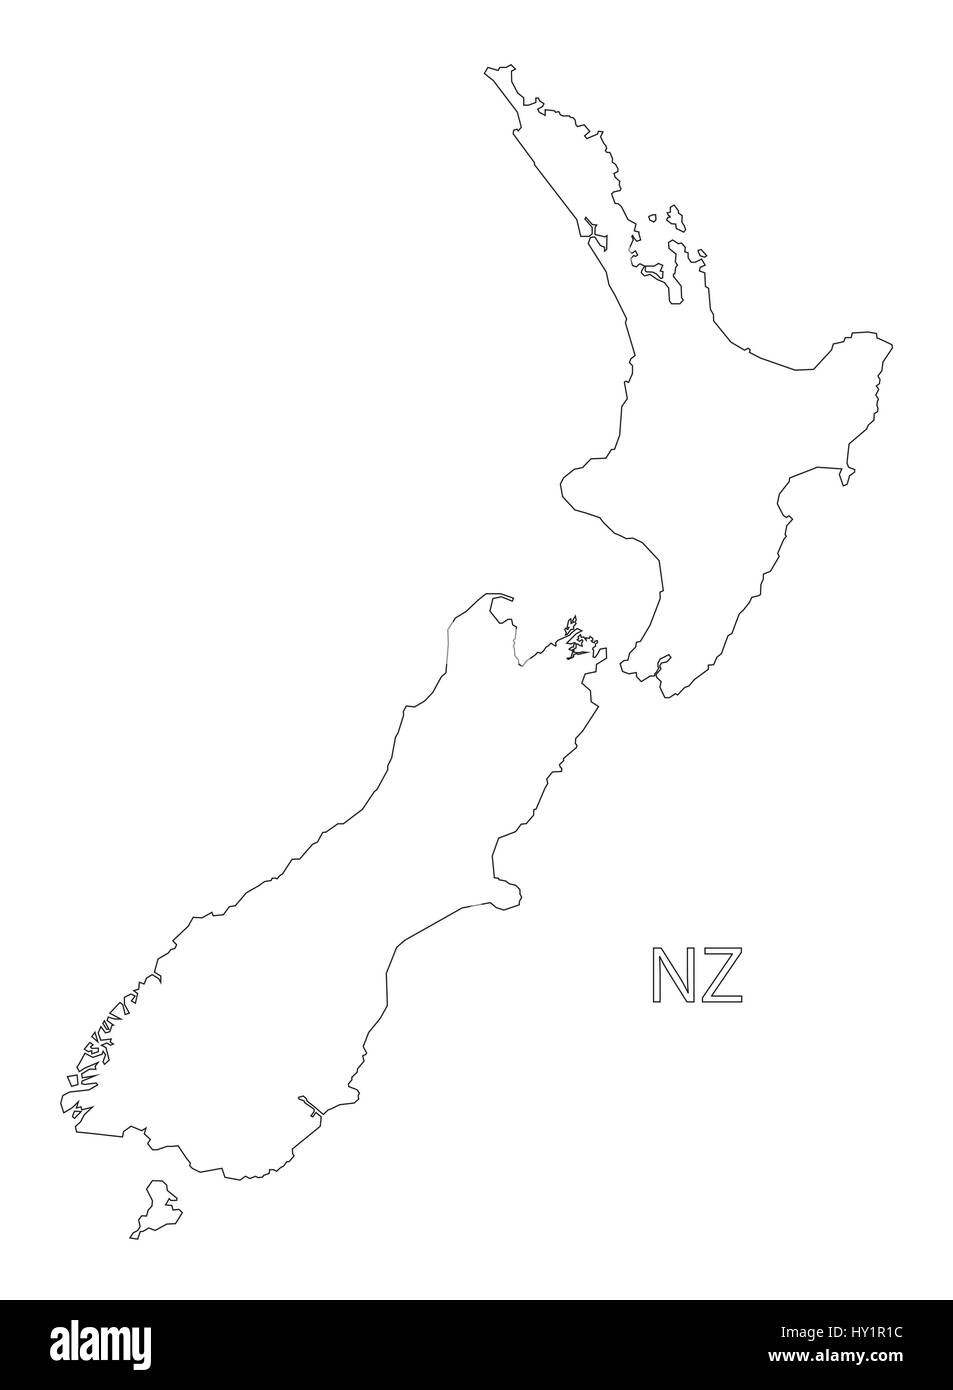 New Zealand outline silhouette map illustration Stock Vector